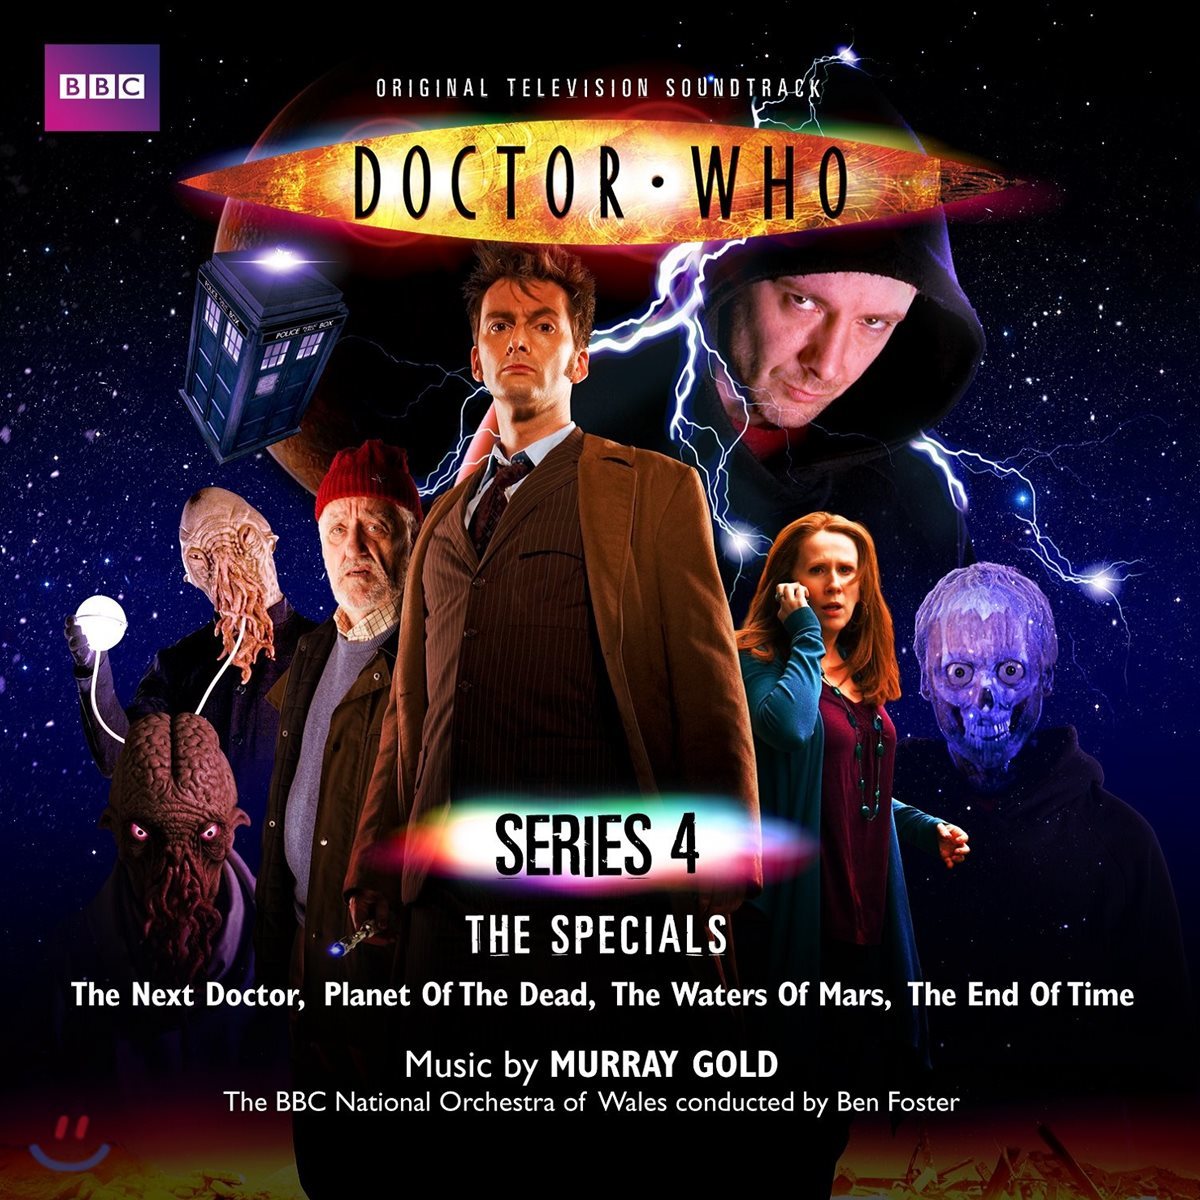 BBC 닥터 후 시리즈 4 스페셜 앨범 (Doctor Who Series 4: The Specials OST by Murray Gold)